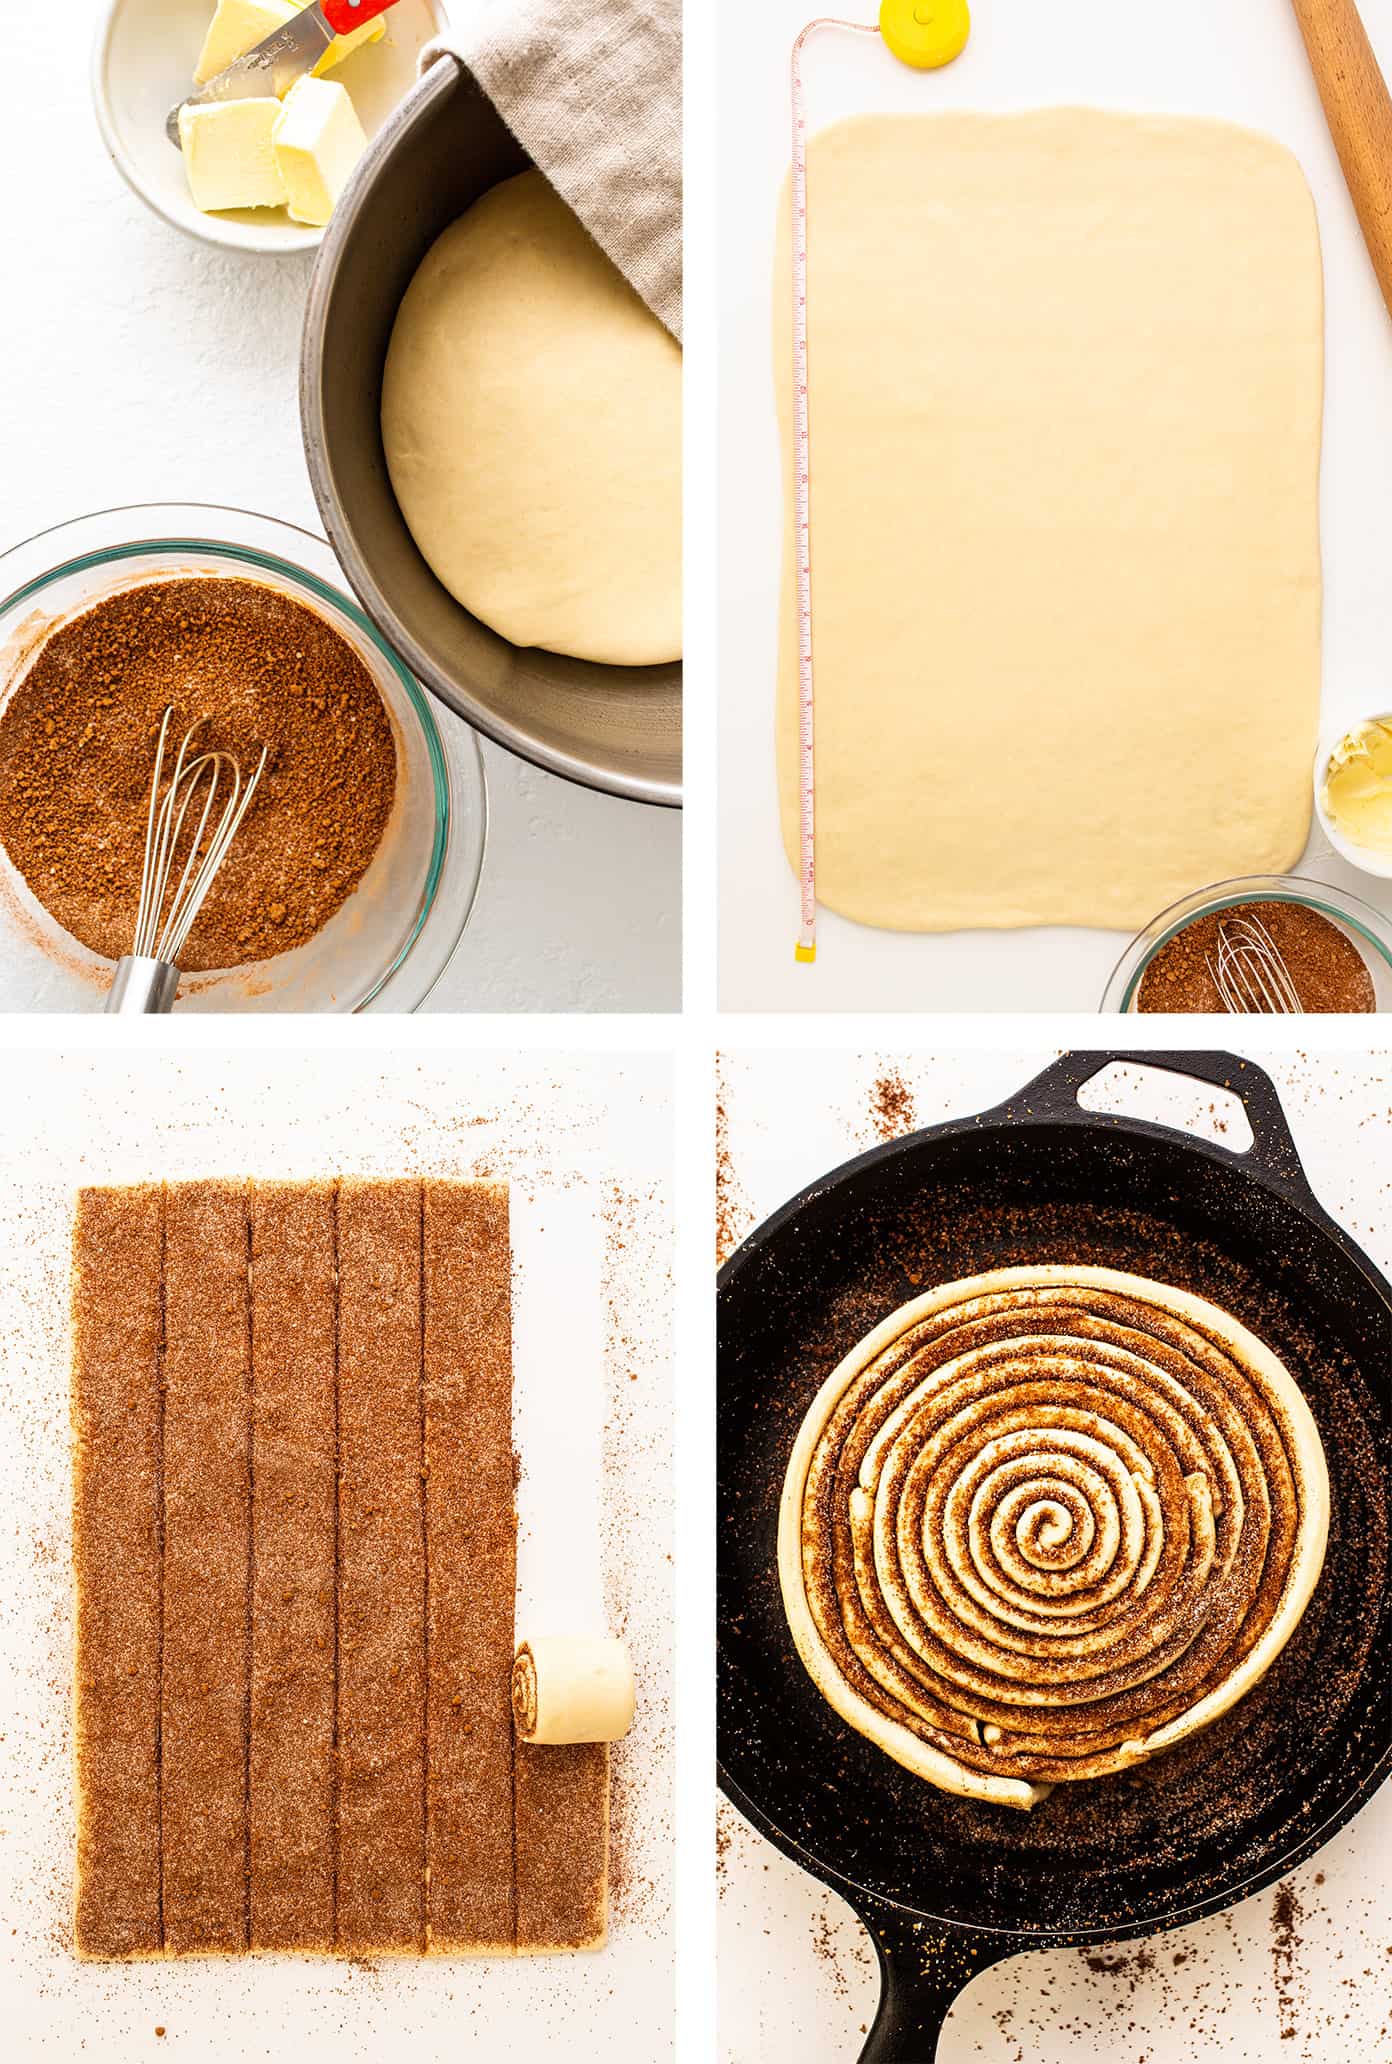 Step by step demonstration of making cinnamon roll dough